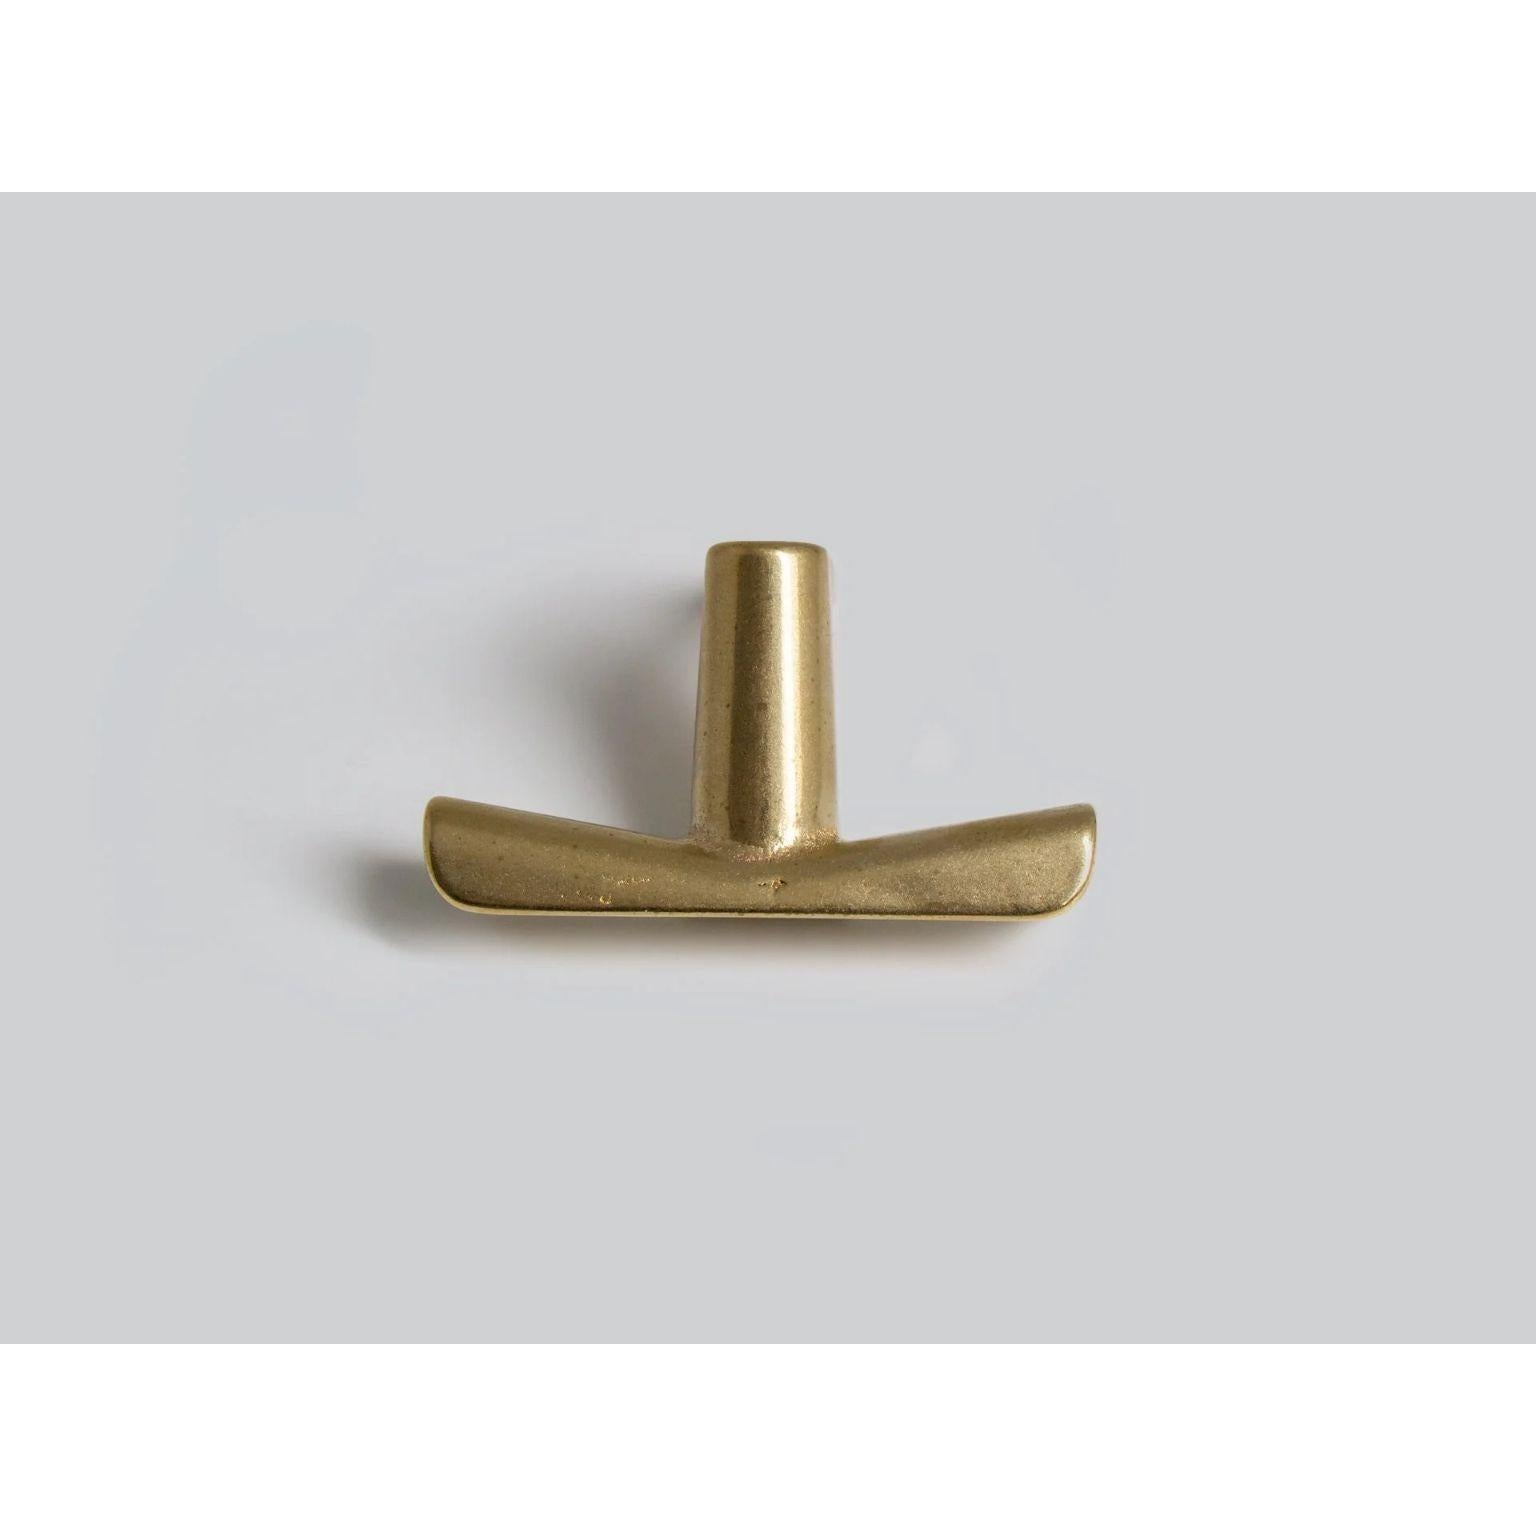 Brass Counter Hook by Henry Wilson
Dimensions: W 6 x D 4 x H 5 cm
Materials: Brass

Designed for hanging bags and coats under bar counters. 
Each piece is sand cast in brass and rumble finished.
They are manufactured in small batches meaning slight